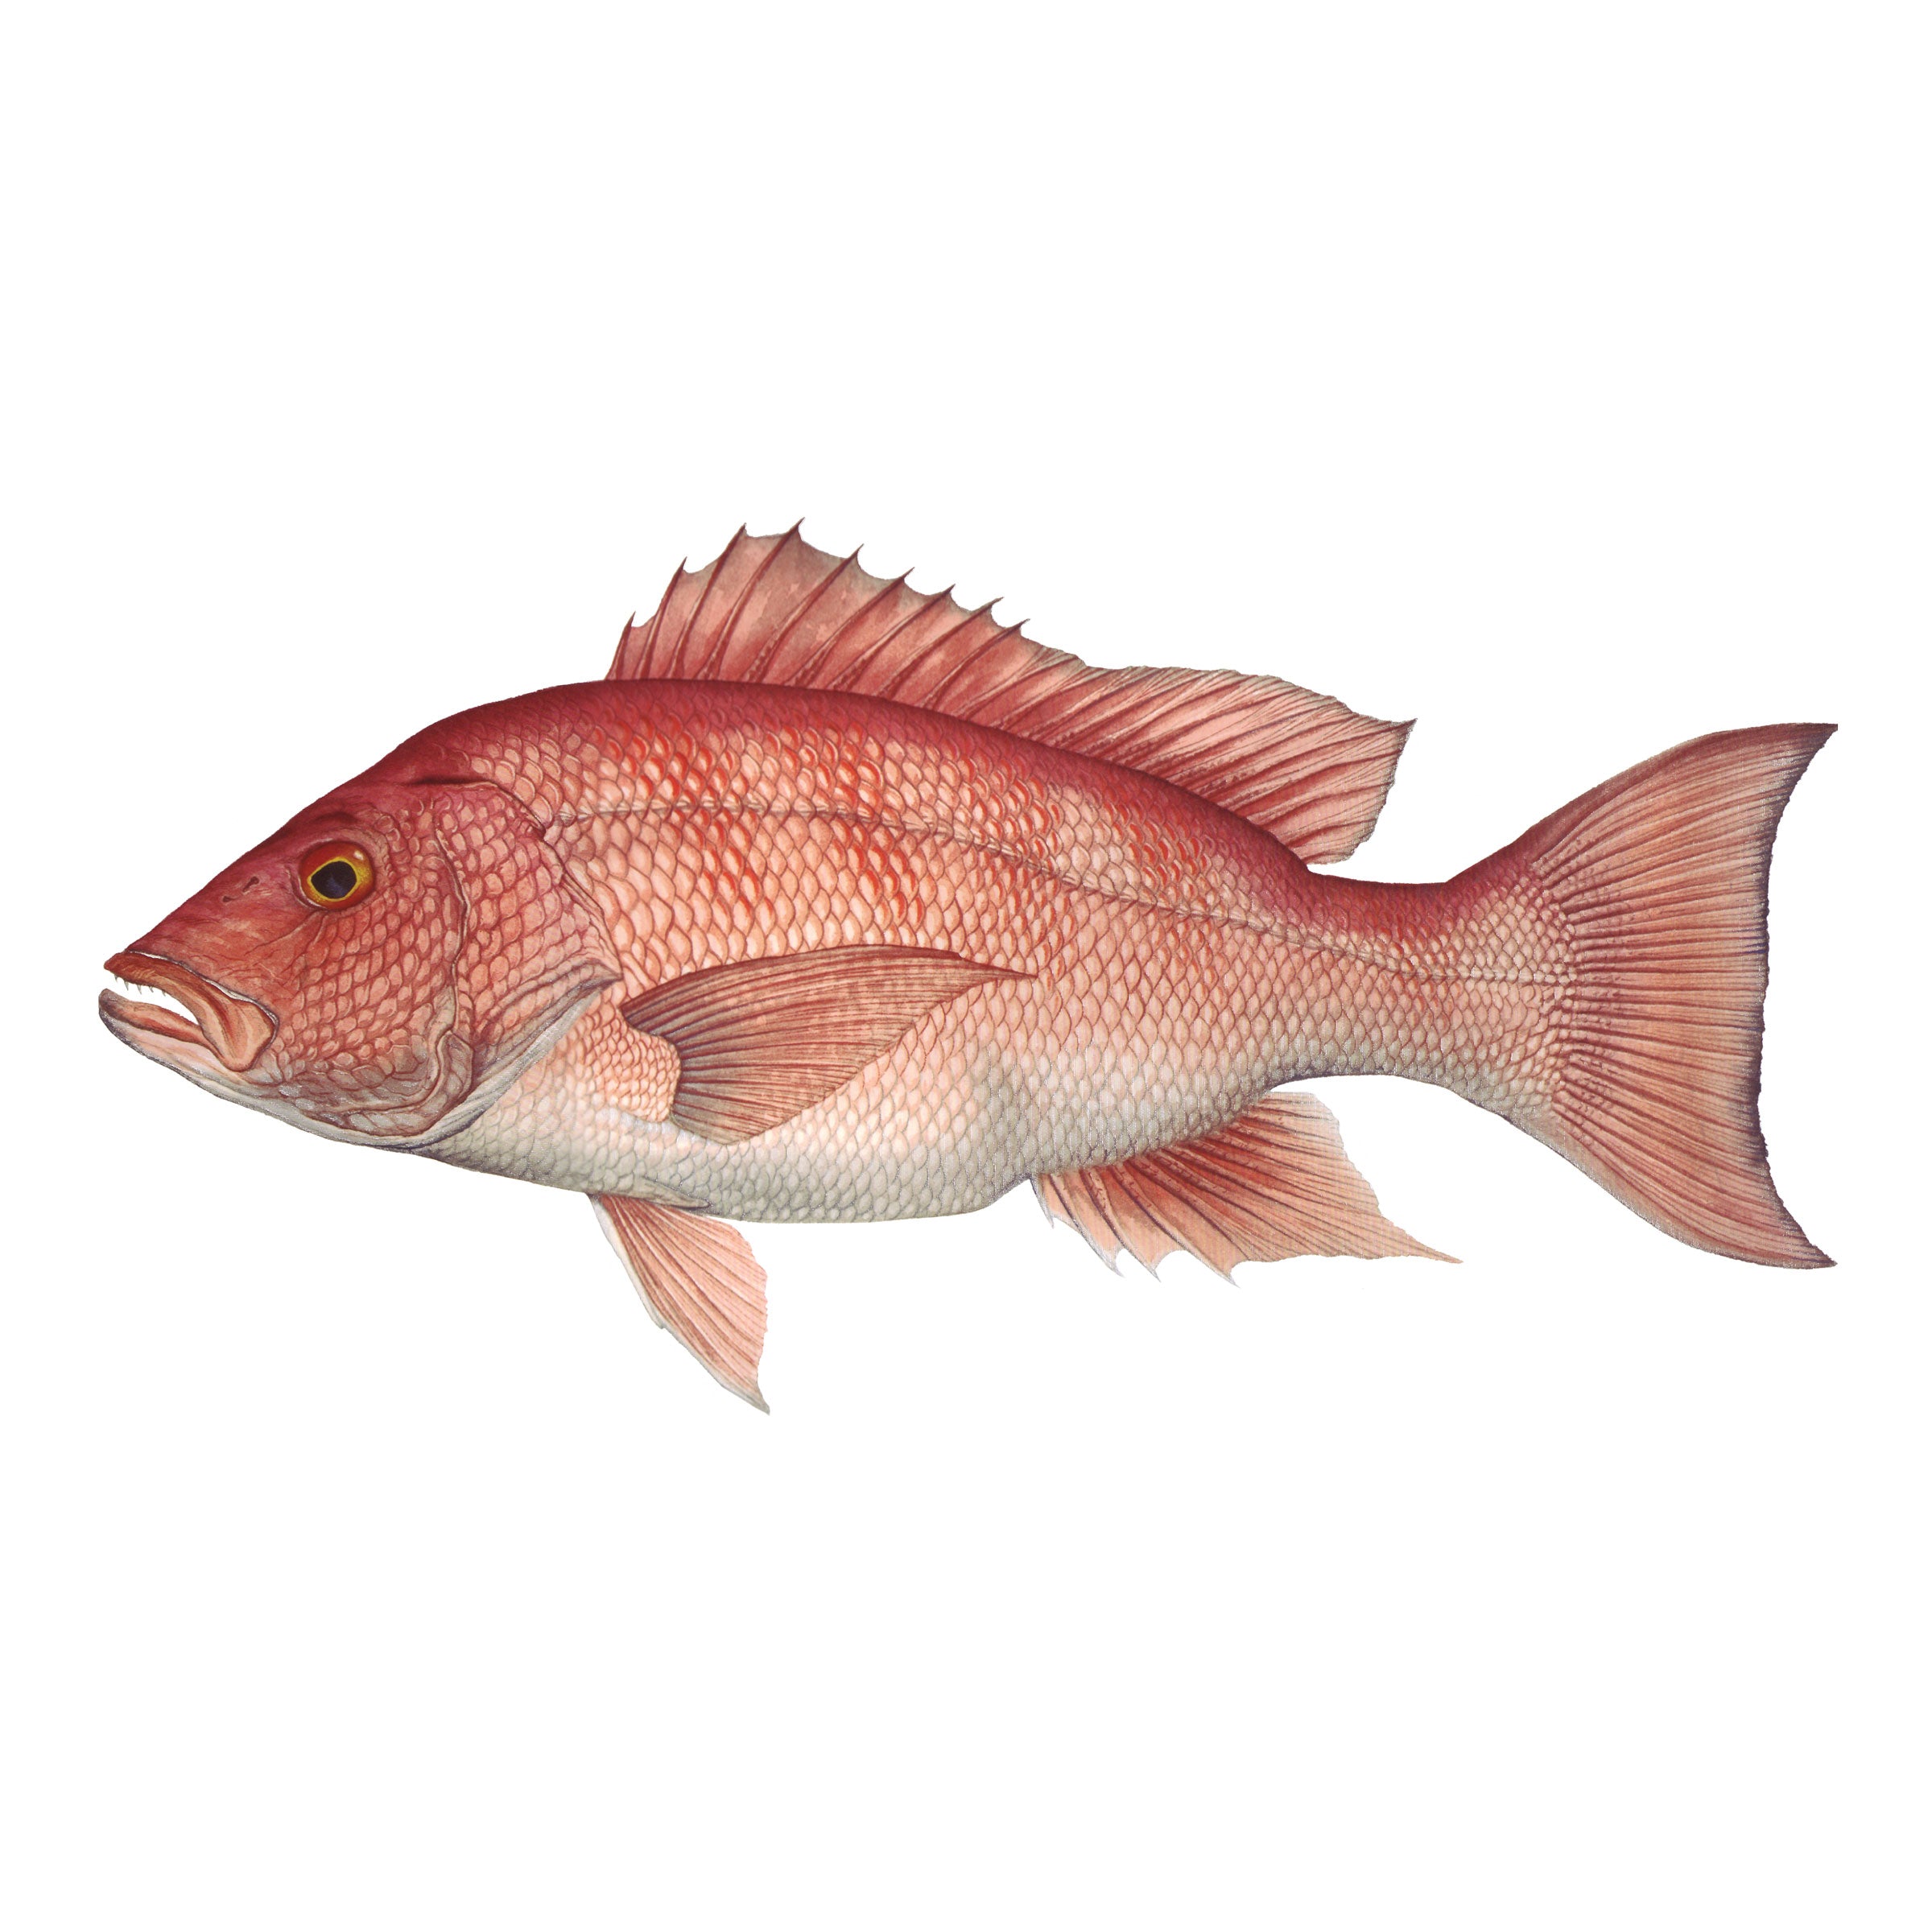 #species_red snapper